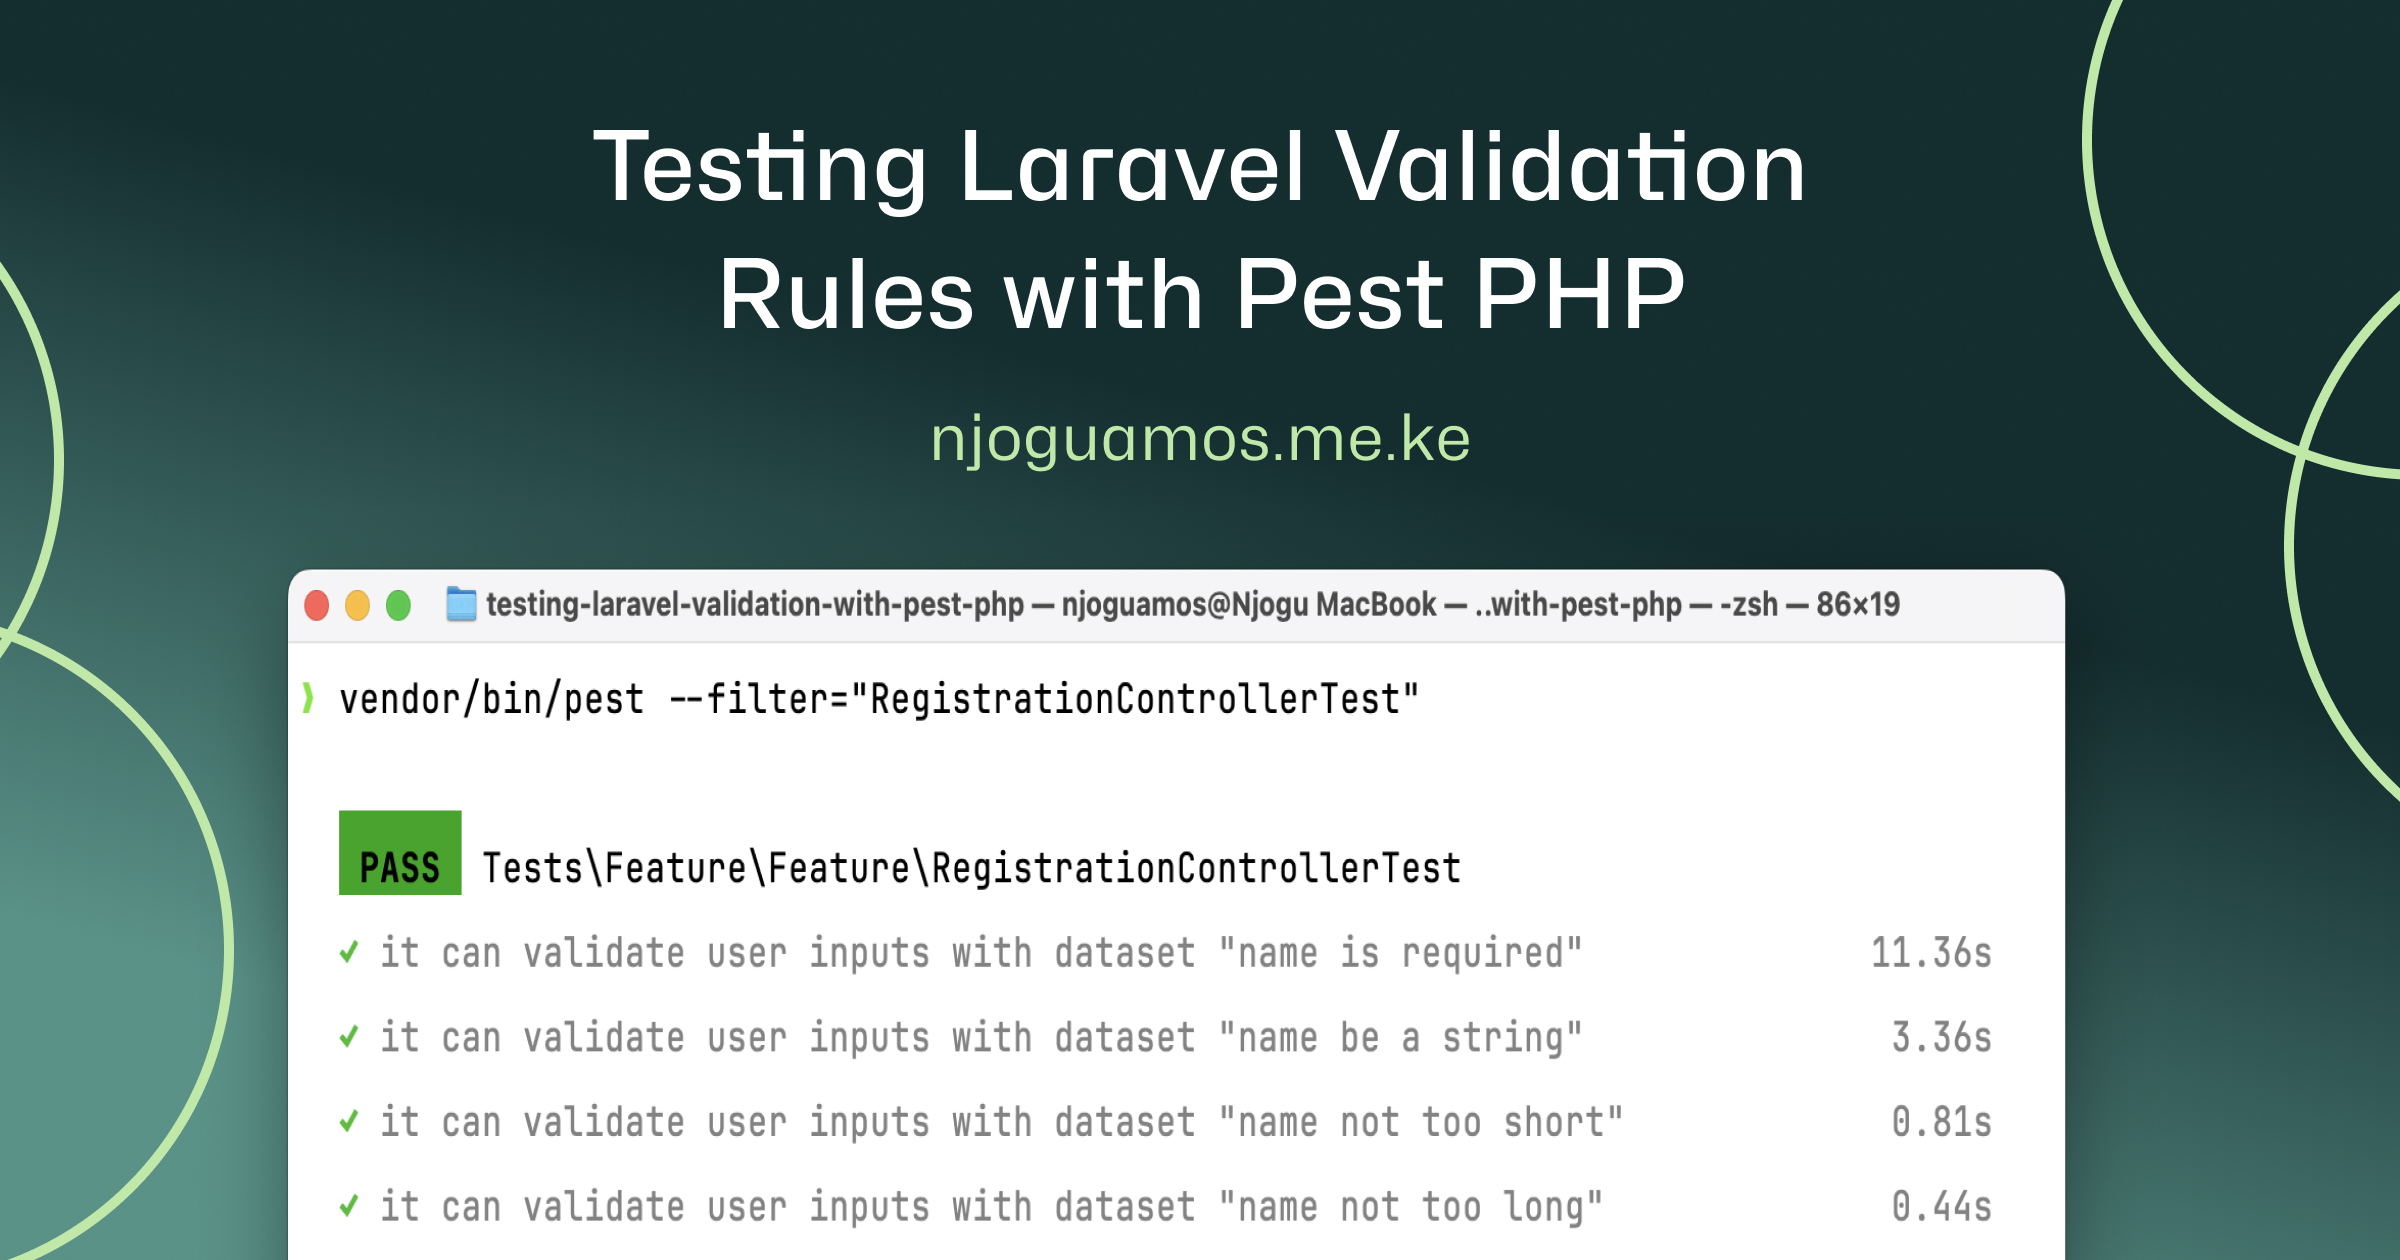 a screenshot of a web page with a text description for testing laravel validation rules with pest php